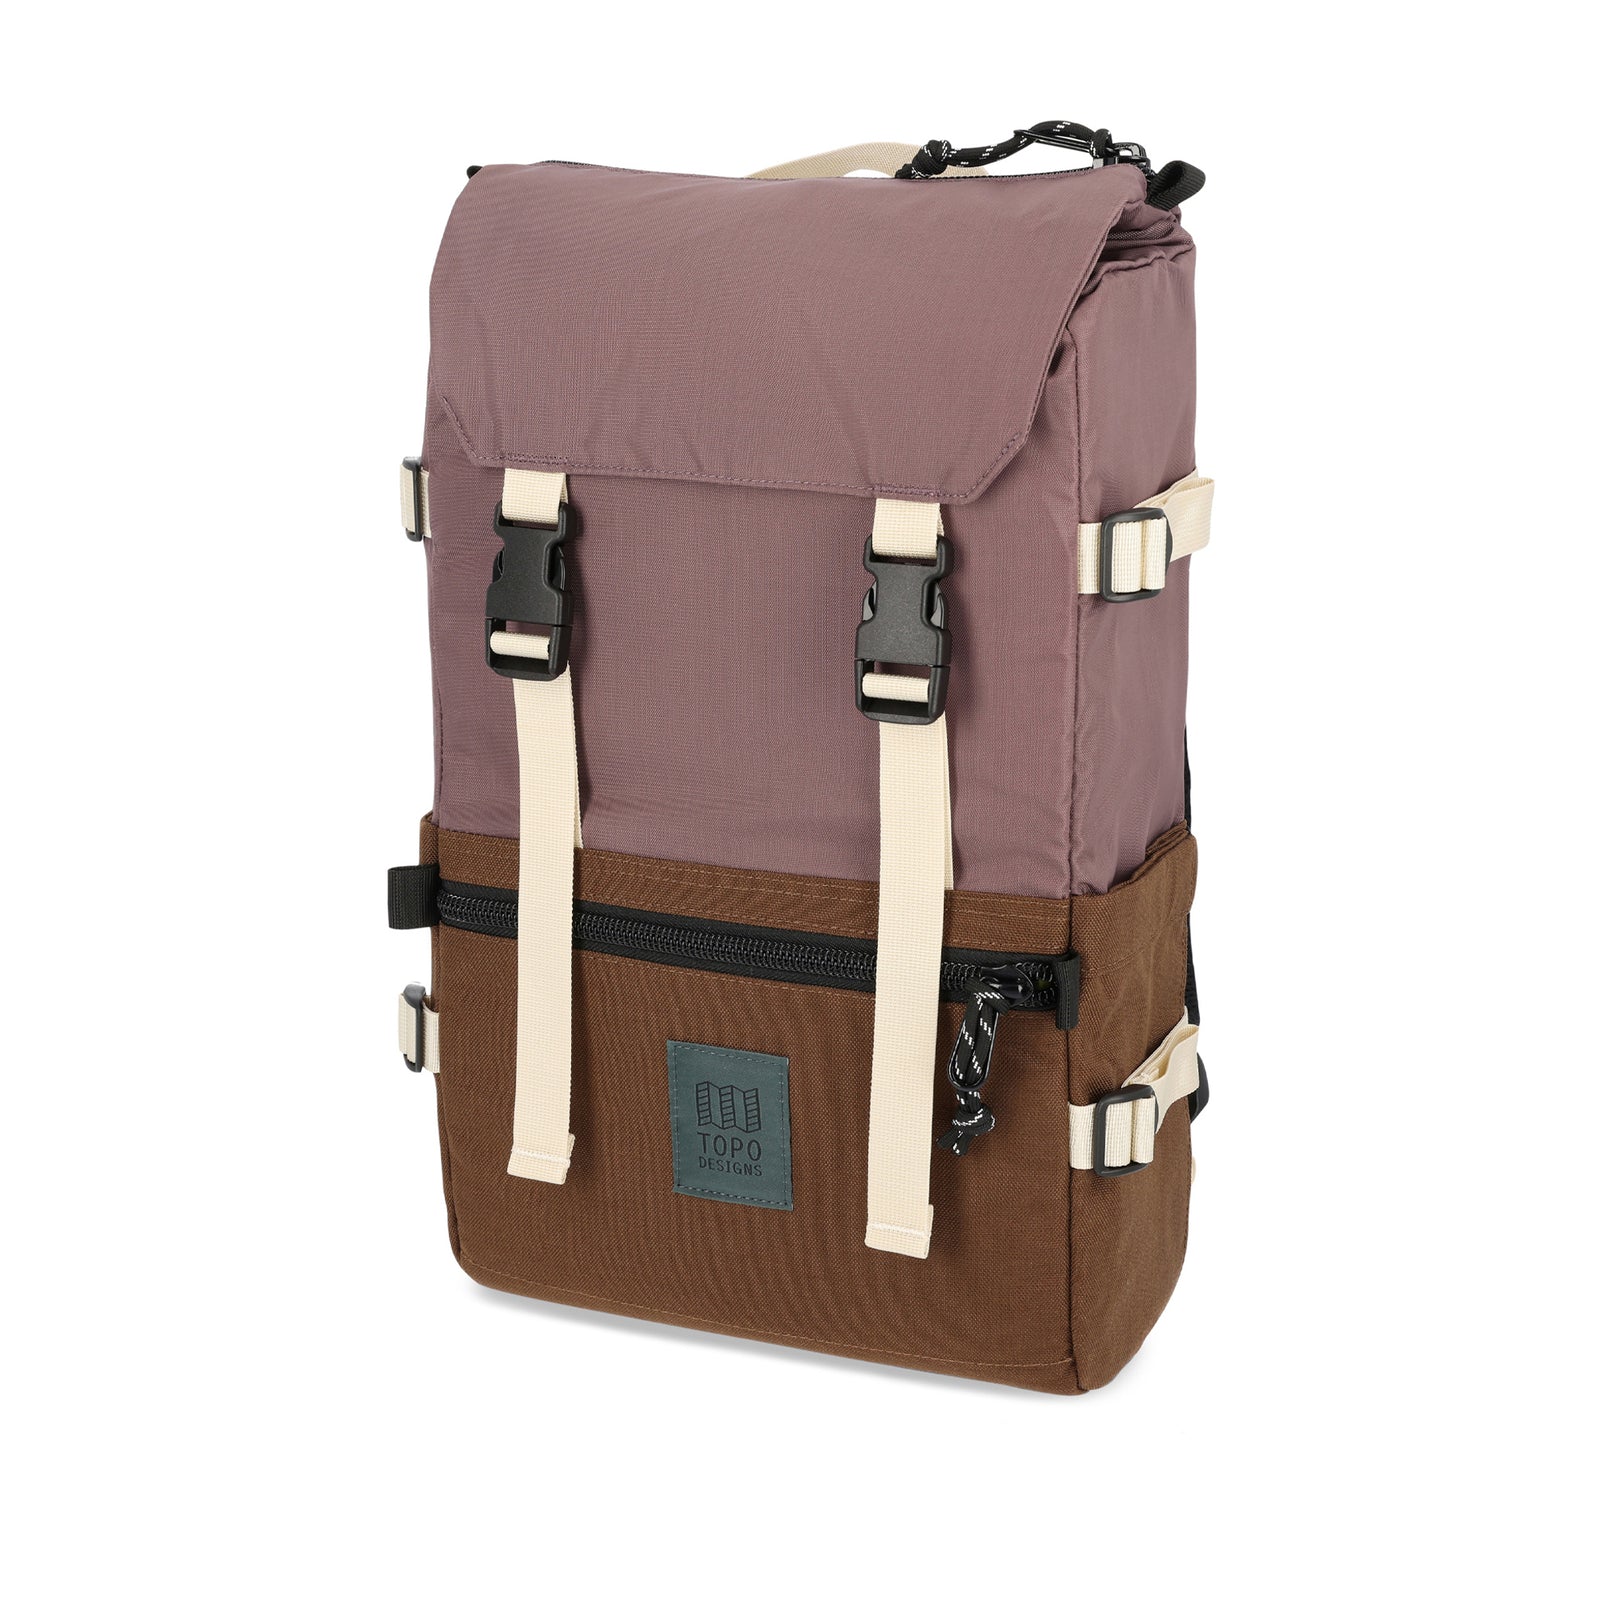 Topo Designs Rover Pack Classic laptop backpack in recycled "Peppercorn / Cocoa" purple brown.